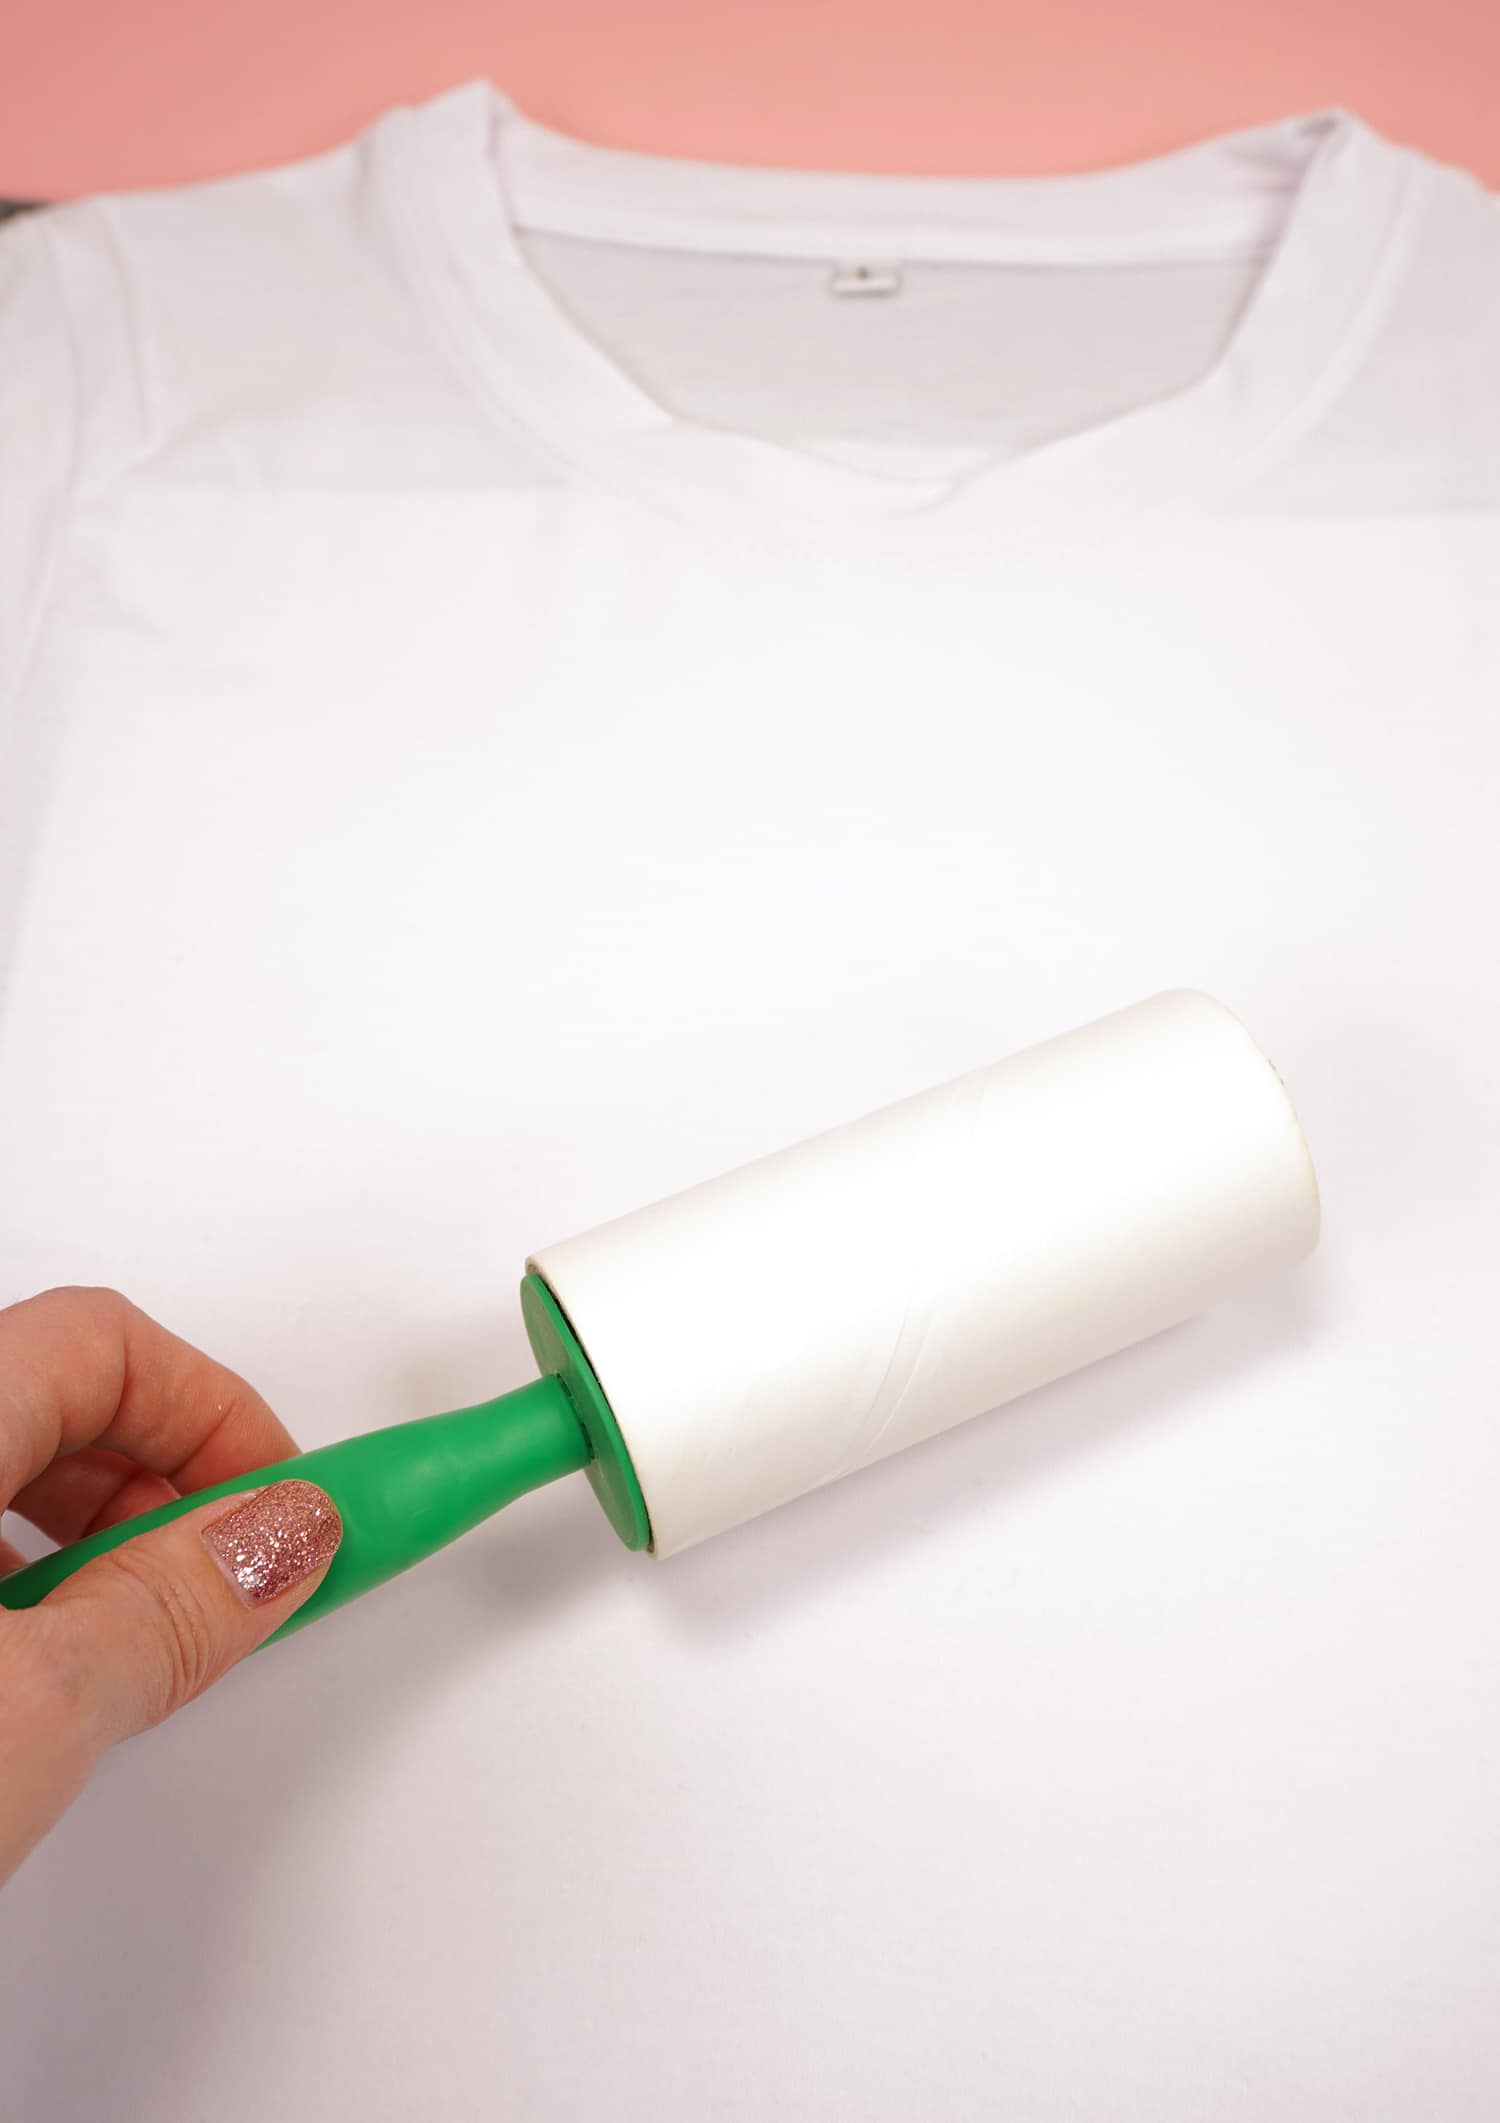 lint roller on the blank white tshirt